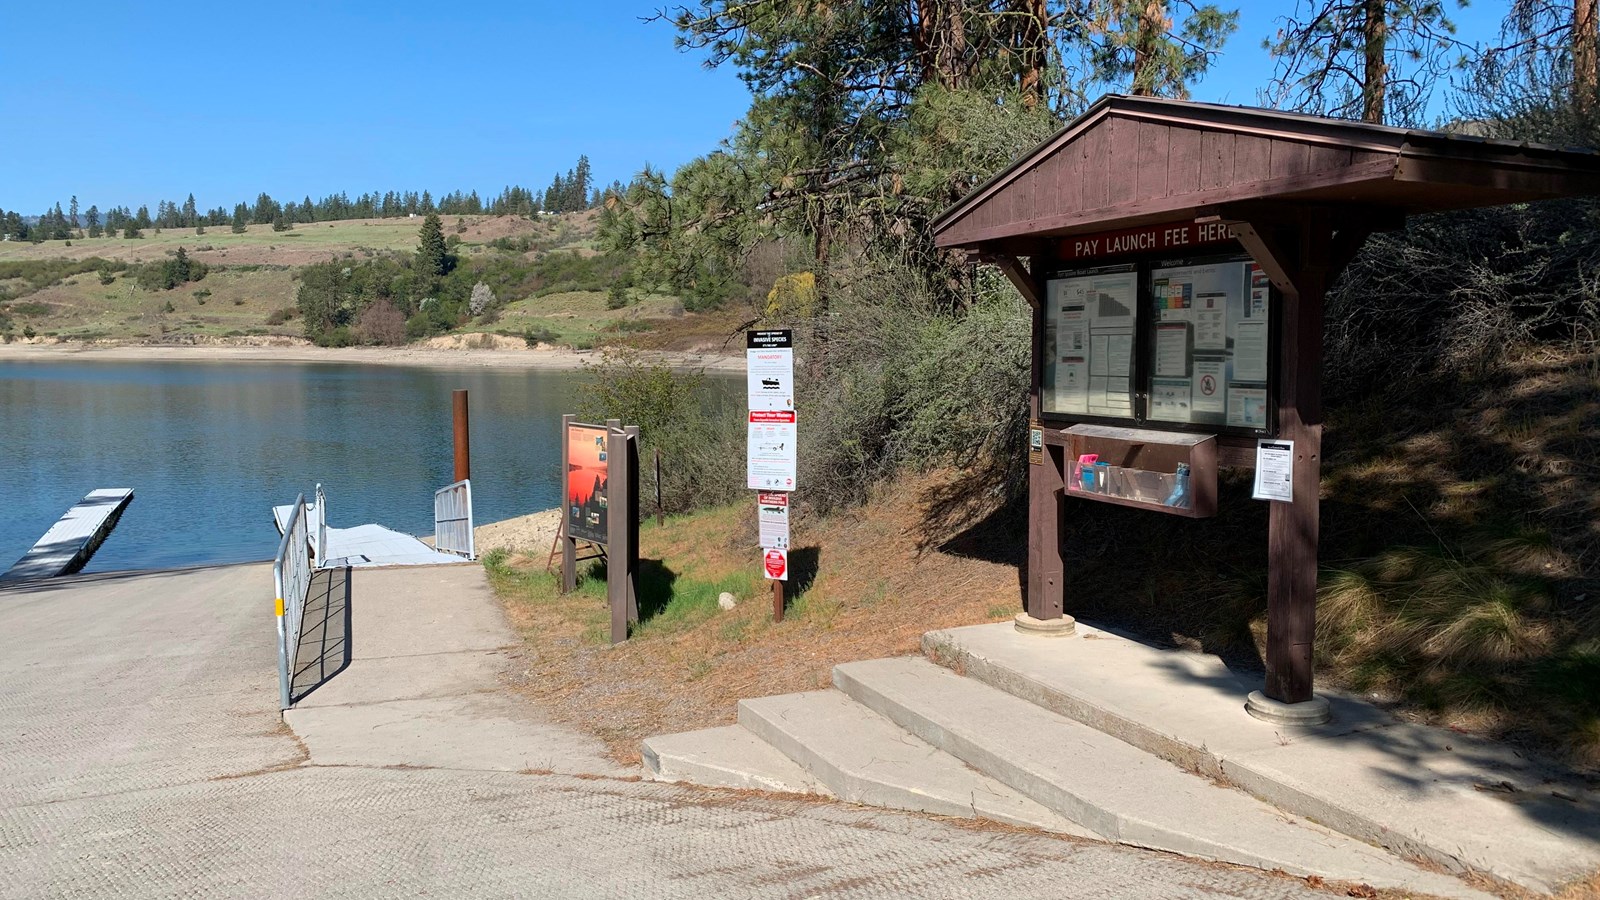 The information kiosk stands to the right of the boat launch, the lake and far shore are visible.